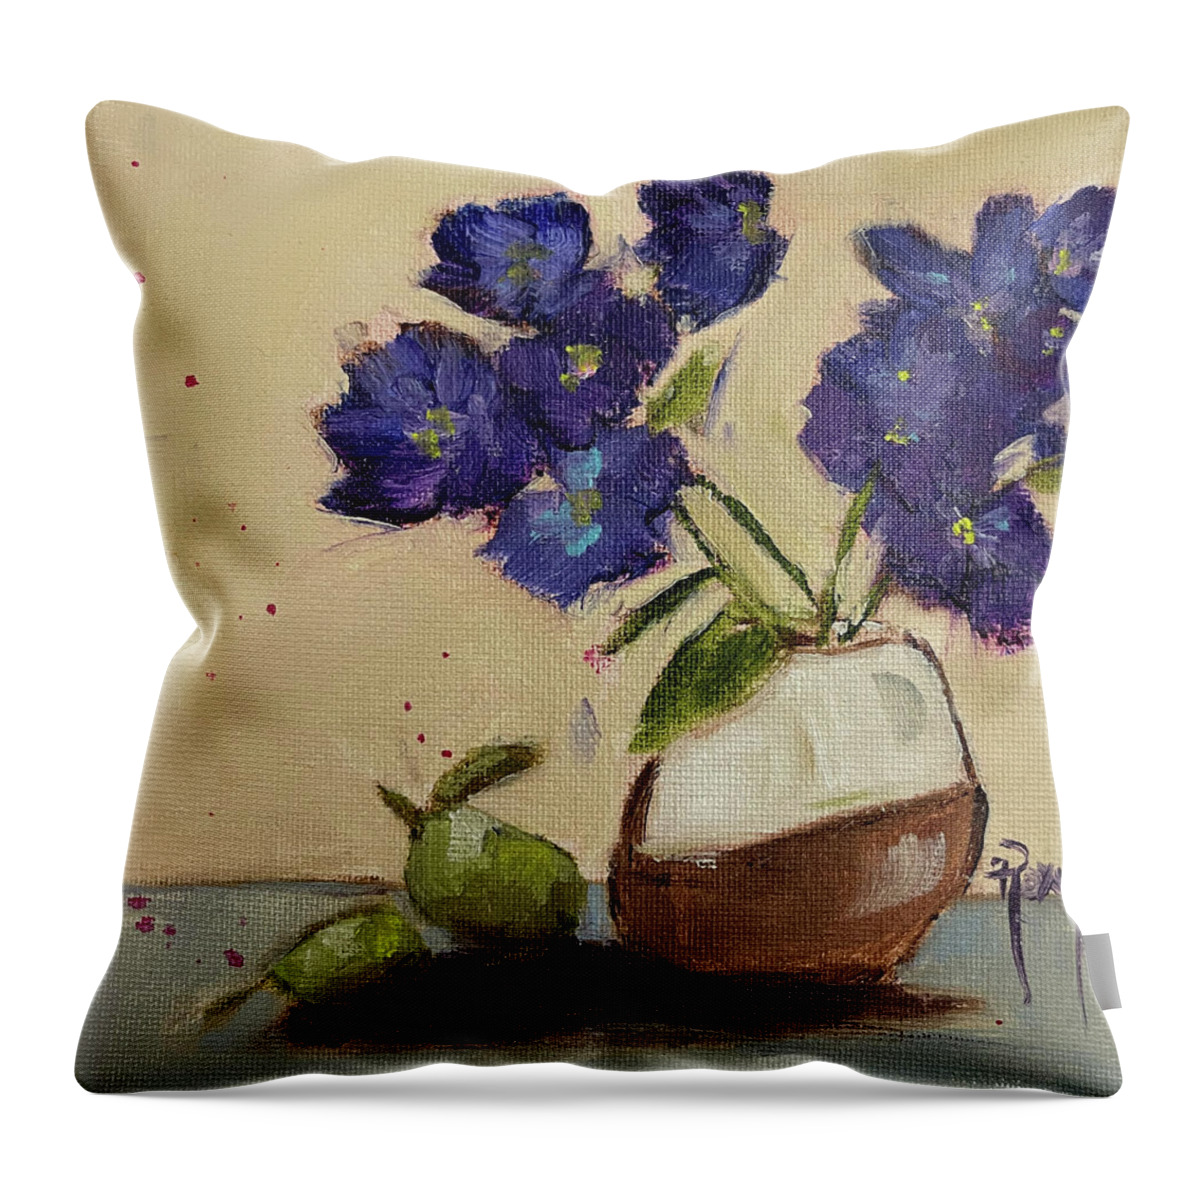 Abstract Throw Pillow featuring the painting Hydrangeas and Pears by Roxy Rich